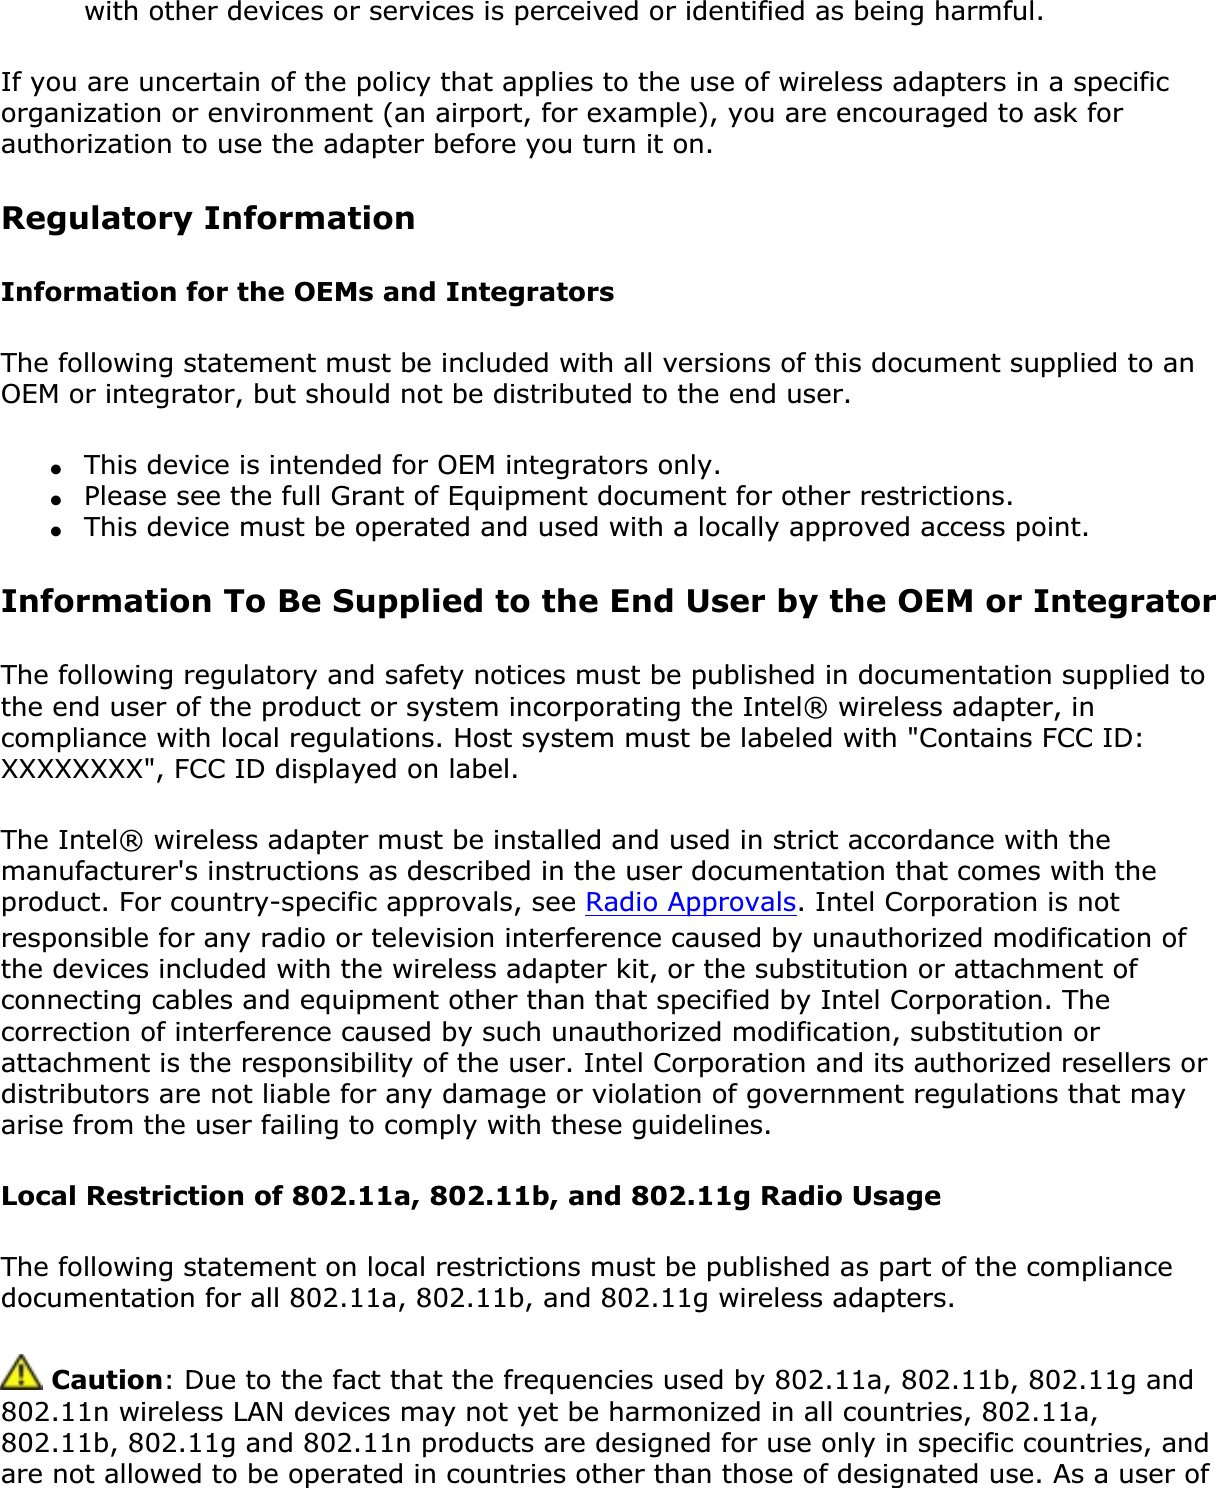 with other devices or services is perceived or identified as being harmful.If you are uncertain of the policy that applies to the use of wireless adapters in a specific organization or environment (an airport, for example), you are encouraged to ask for authorization to use the adapter before you turn it on. Regulatory Information Information for the OEMs and IntegratorsThe following statement must be included with all versions of this document supplied to an OEM or integrator, but should not be distributed to the end user.●This device is intended for OEM integrators only.●Please see the full Grant of Equipment document for other restrictions.●This device must be operated and used with a locally approved access point.Information To Be Supplied to the End User by the OEM or IntegratorThe following regulatory and safety notices must be published in documentation supplied to the end user of the product or system incorporating the Intel® wireless adapter, in compliance with local regulations. Host system must be labeled with &quot;Contains FCC ID: XXXXXXXX&quot;, FCC ID displayed on label.The Intel® wireless adapter must be installed and used in strict accordance with the manufacturer&apos;s instructions as described in the user documentation that comes with the product. For country-specific approvals, see Radio Approvals. Intel Corporation is not responsible for any radio or television interference caused by unauthorized modification of the devices included with the wireless adapter kit, or the substitution or attachment of connecting cables and equipment other than that specified by Intel Corporation. The correction of interference caused by such unauthorized modification, substitution or attachment is the responsibility of the user. Intel Corporation and its authorized resellers or distributors are not liable for any damage or violation of government regulations that may arise from the user failing to comply with these guidelines.Local Restriction of 802.11a, 802.11b, and 802.11g Radio UsageThe following statement on local restrictions must be published as part of the compliance documentation for all 802.11a, 802.11b, and 802.11g wireless adapters. Caution: Due to the fact that the frequencies used by 802.11a, 802.11b, 802.11g and 802.11n wireless LAN devices may not yet be harmonized in all countries, 802.11a, 802.11b, 802.11g and 802.11n products are designed for use only in specific countries, and are not allowed to be operated in countries other than those of designated use. As a user of 